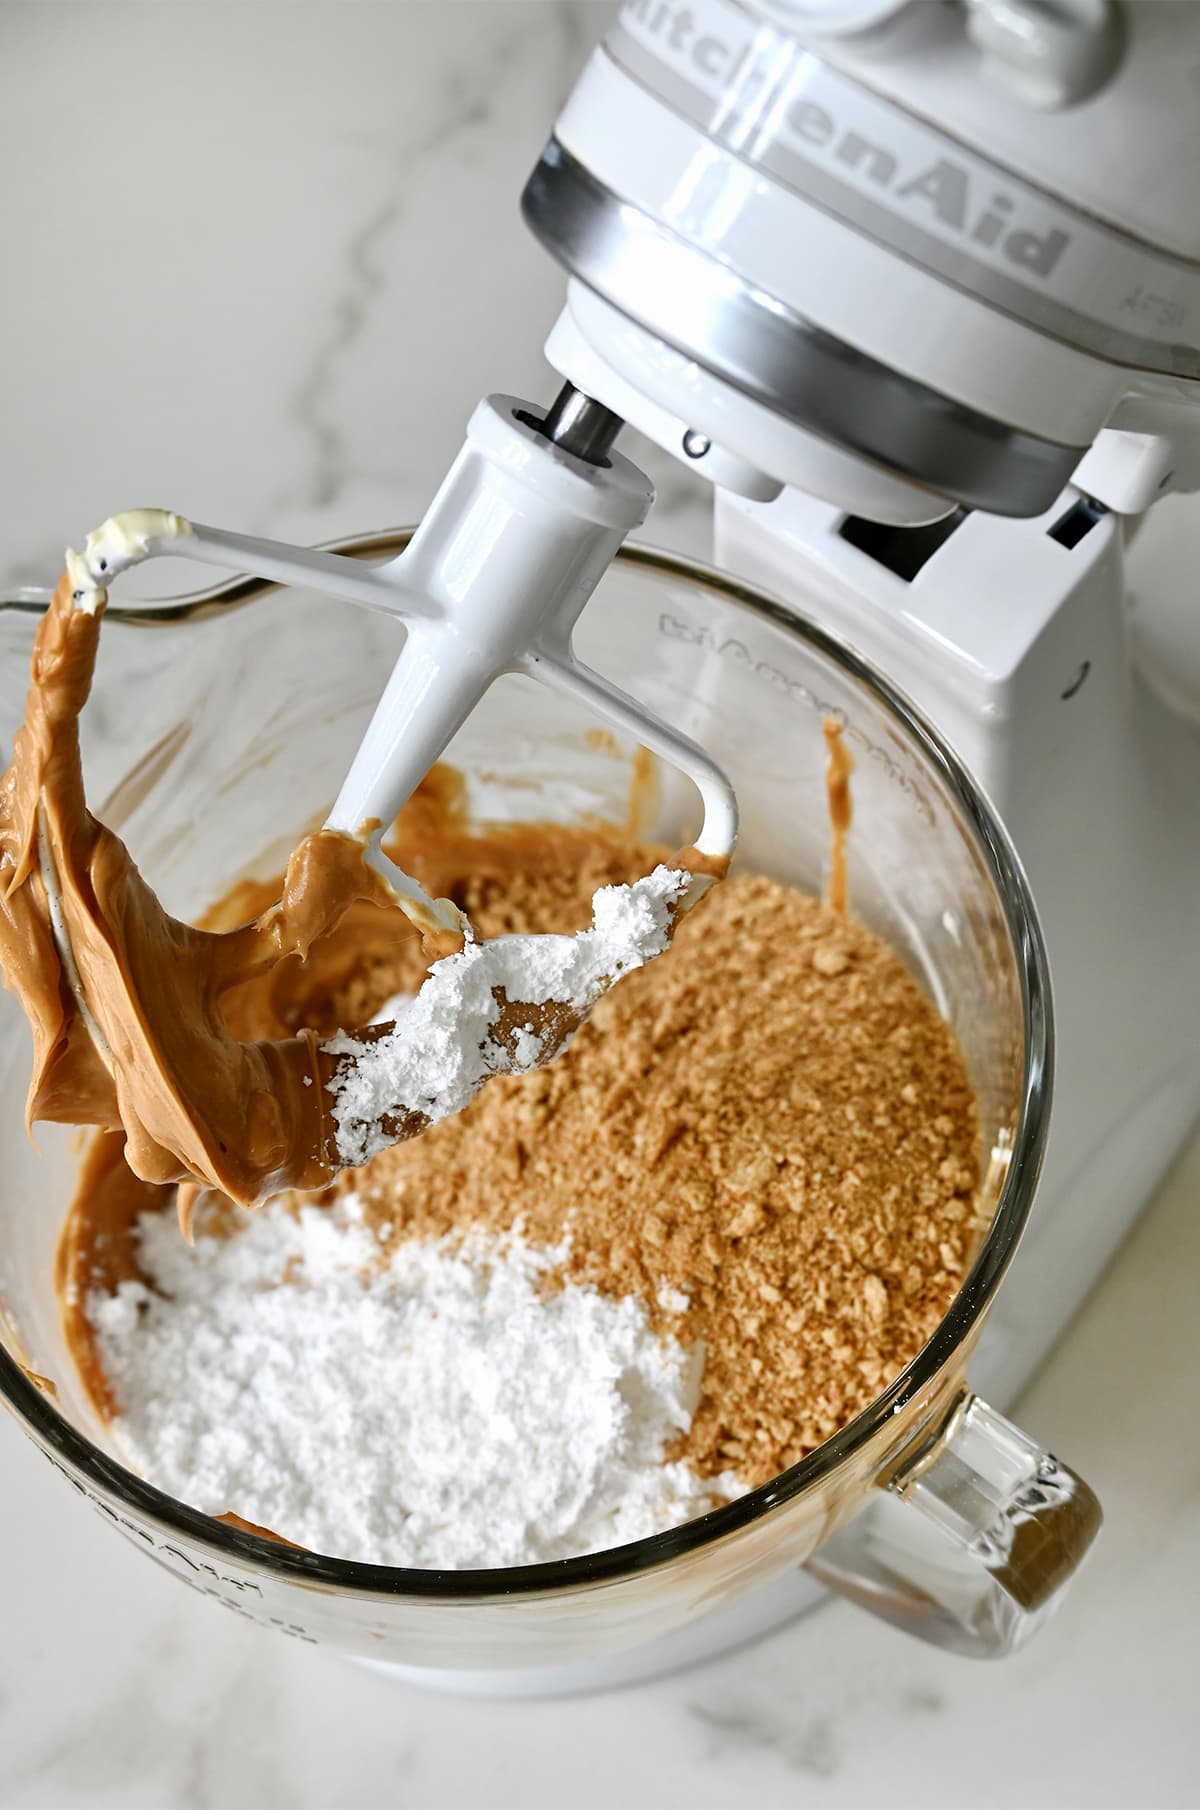 A stand mixer bowl containing creamy peanut butter, graham cracker crumbs and powdered sugar.